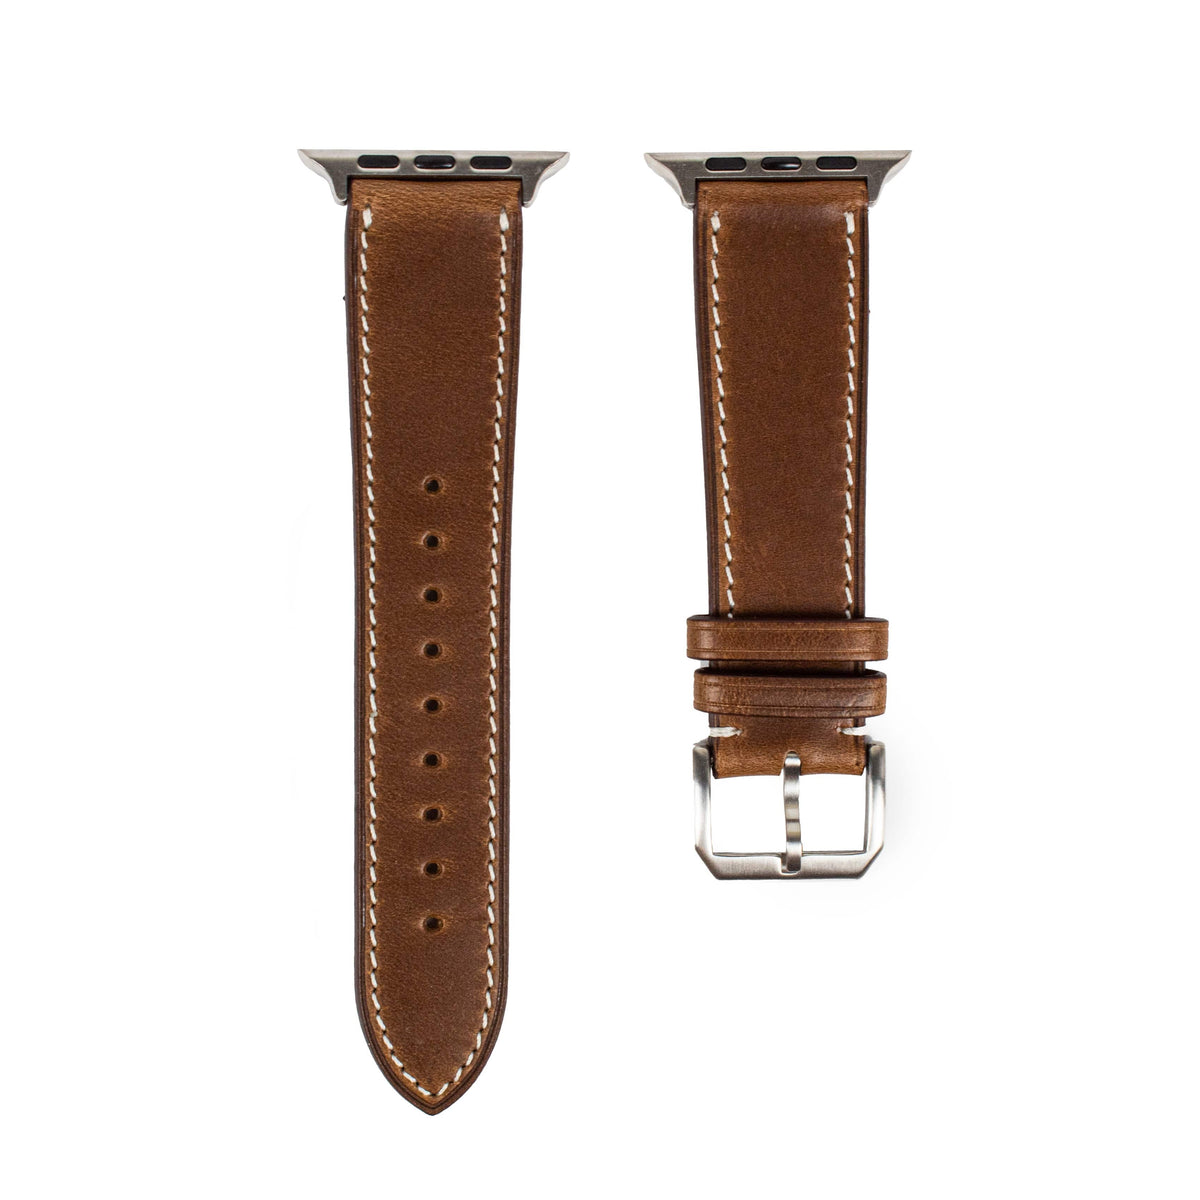 Horween Leather Apple Watch Band, Horween Cowhide Leather